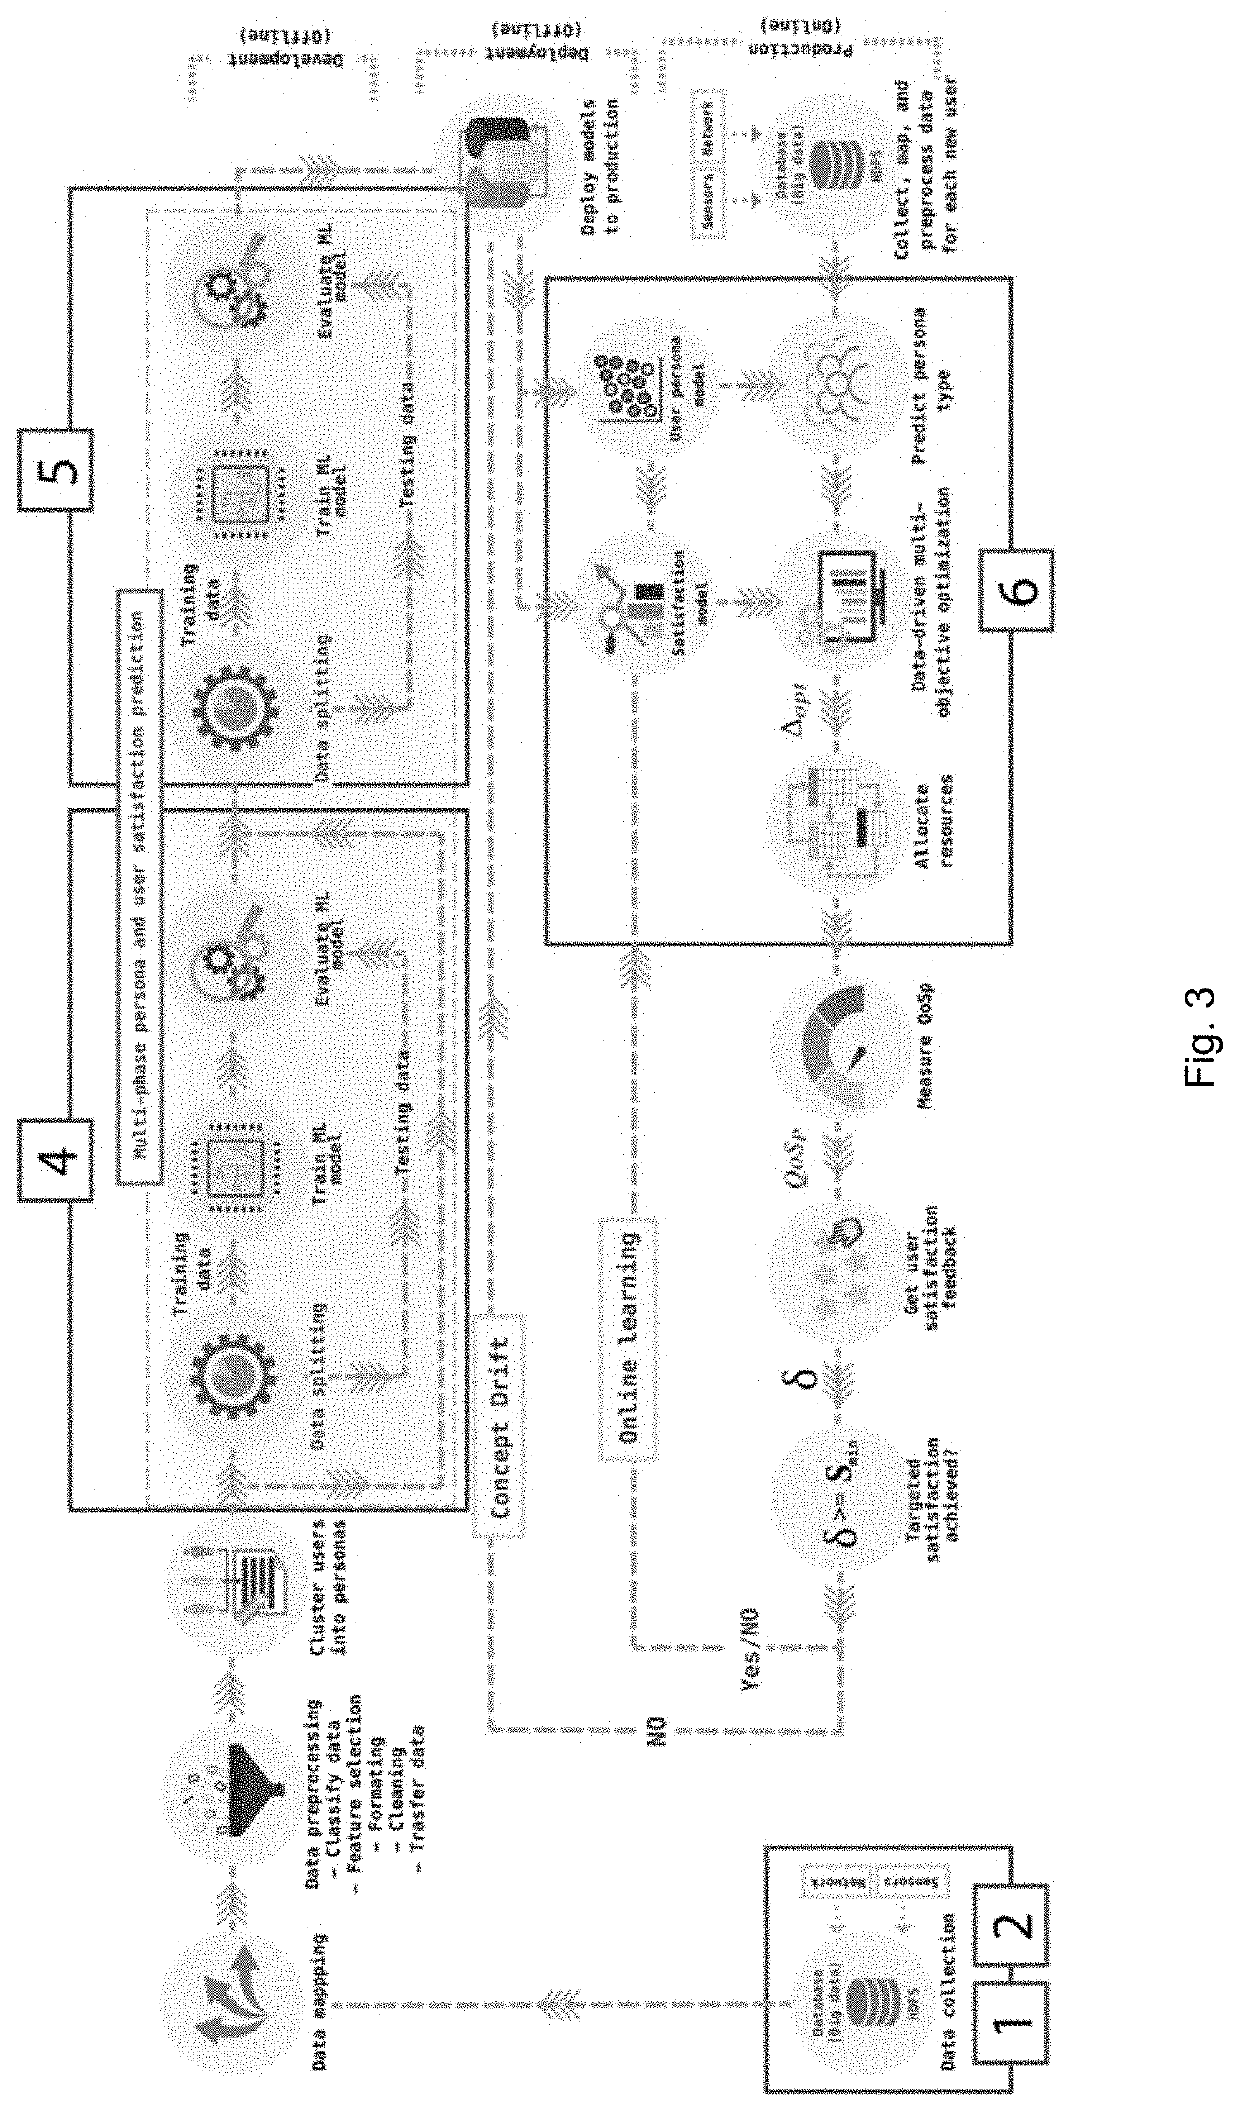 Enabling wireless network personalization using zone of tolerance modeling and predictive analytics